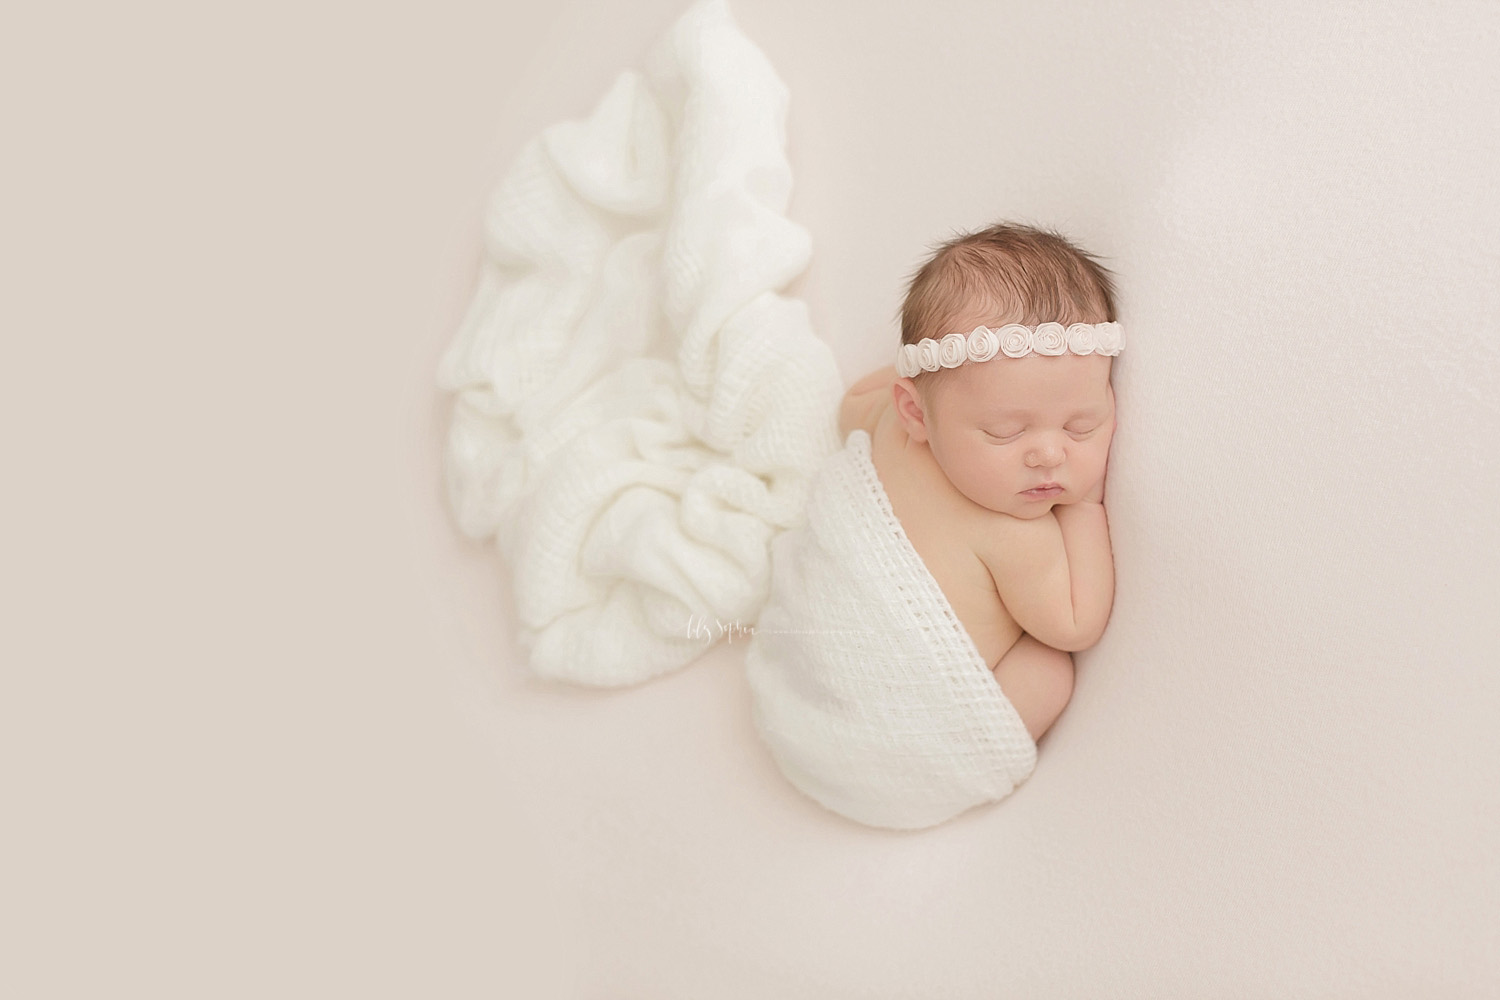  image of a sleeping, newborn, baby, girl, on her stomach, partially wrapped with a waffle weave, cream, blanket, with a rosebud headband in her hair.&nbsp; 